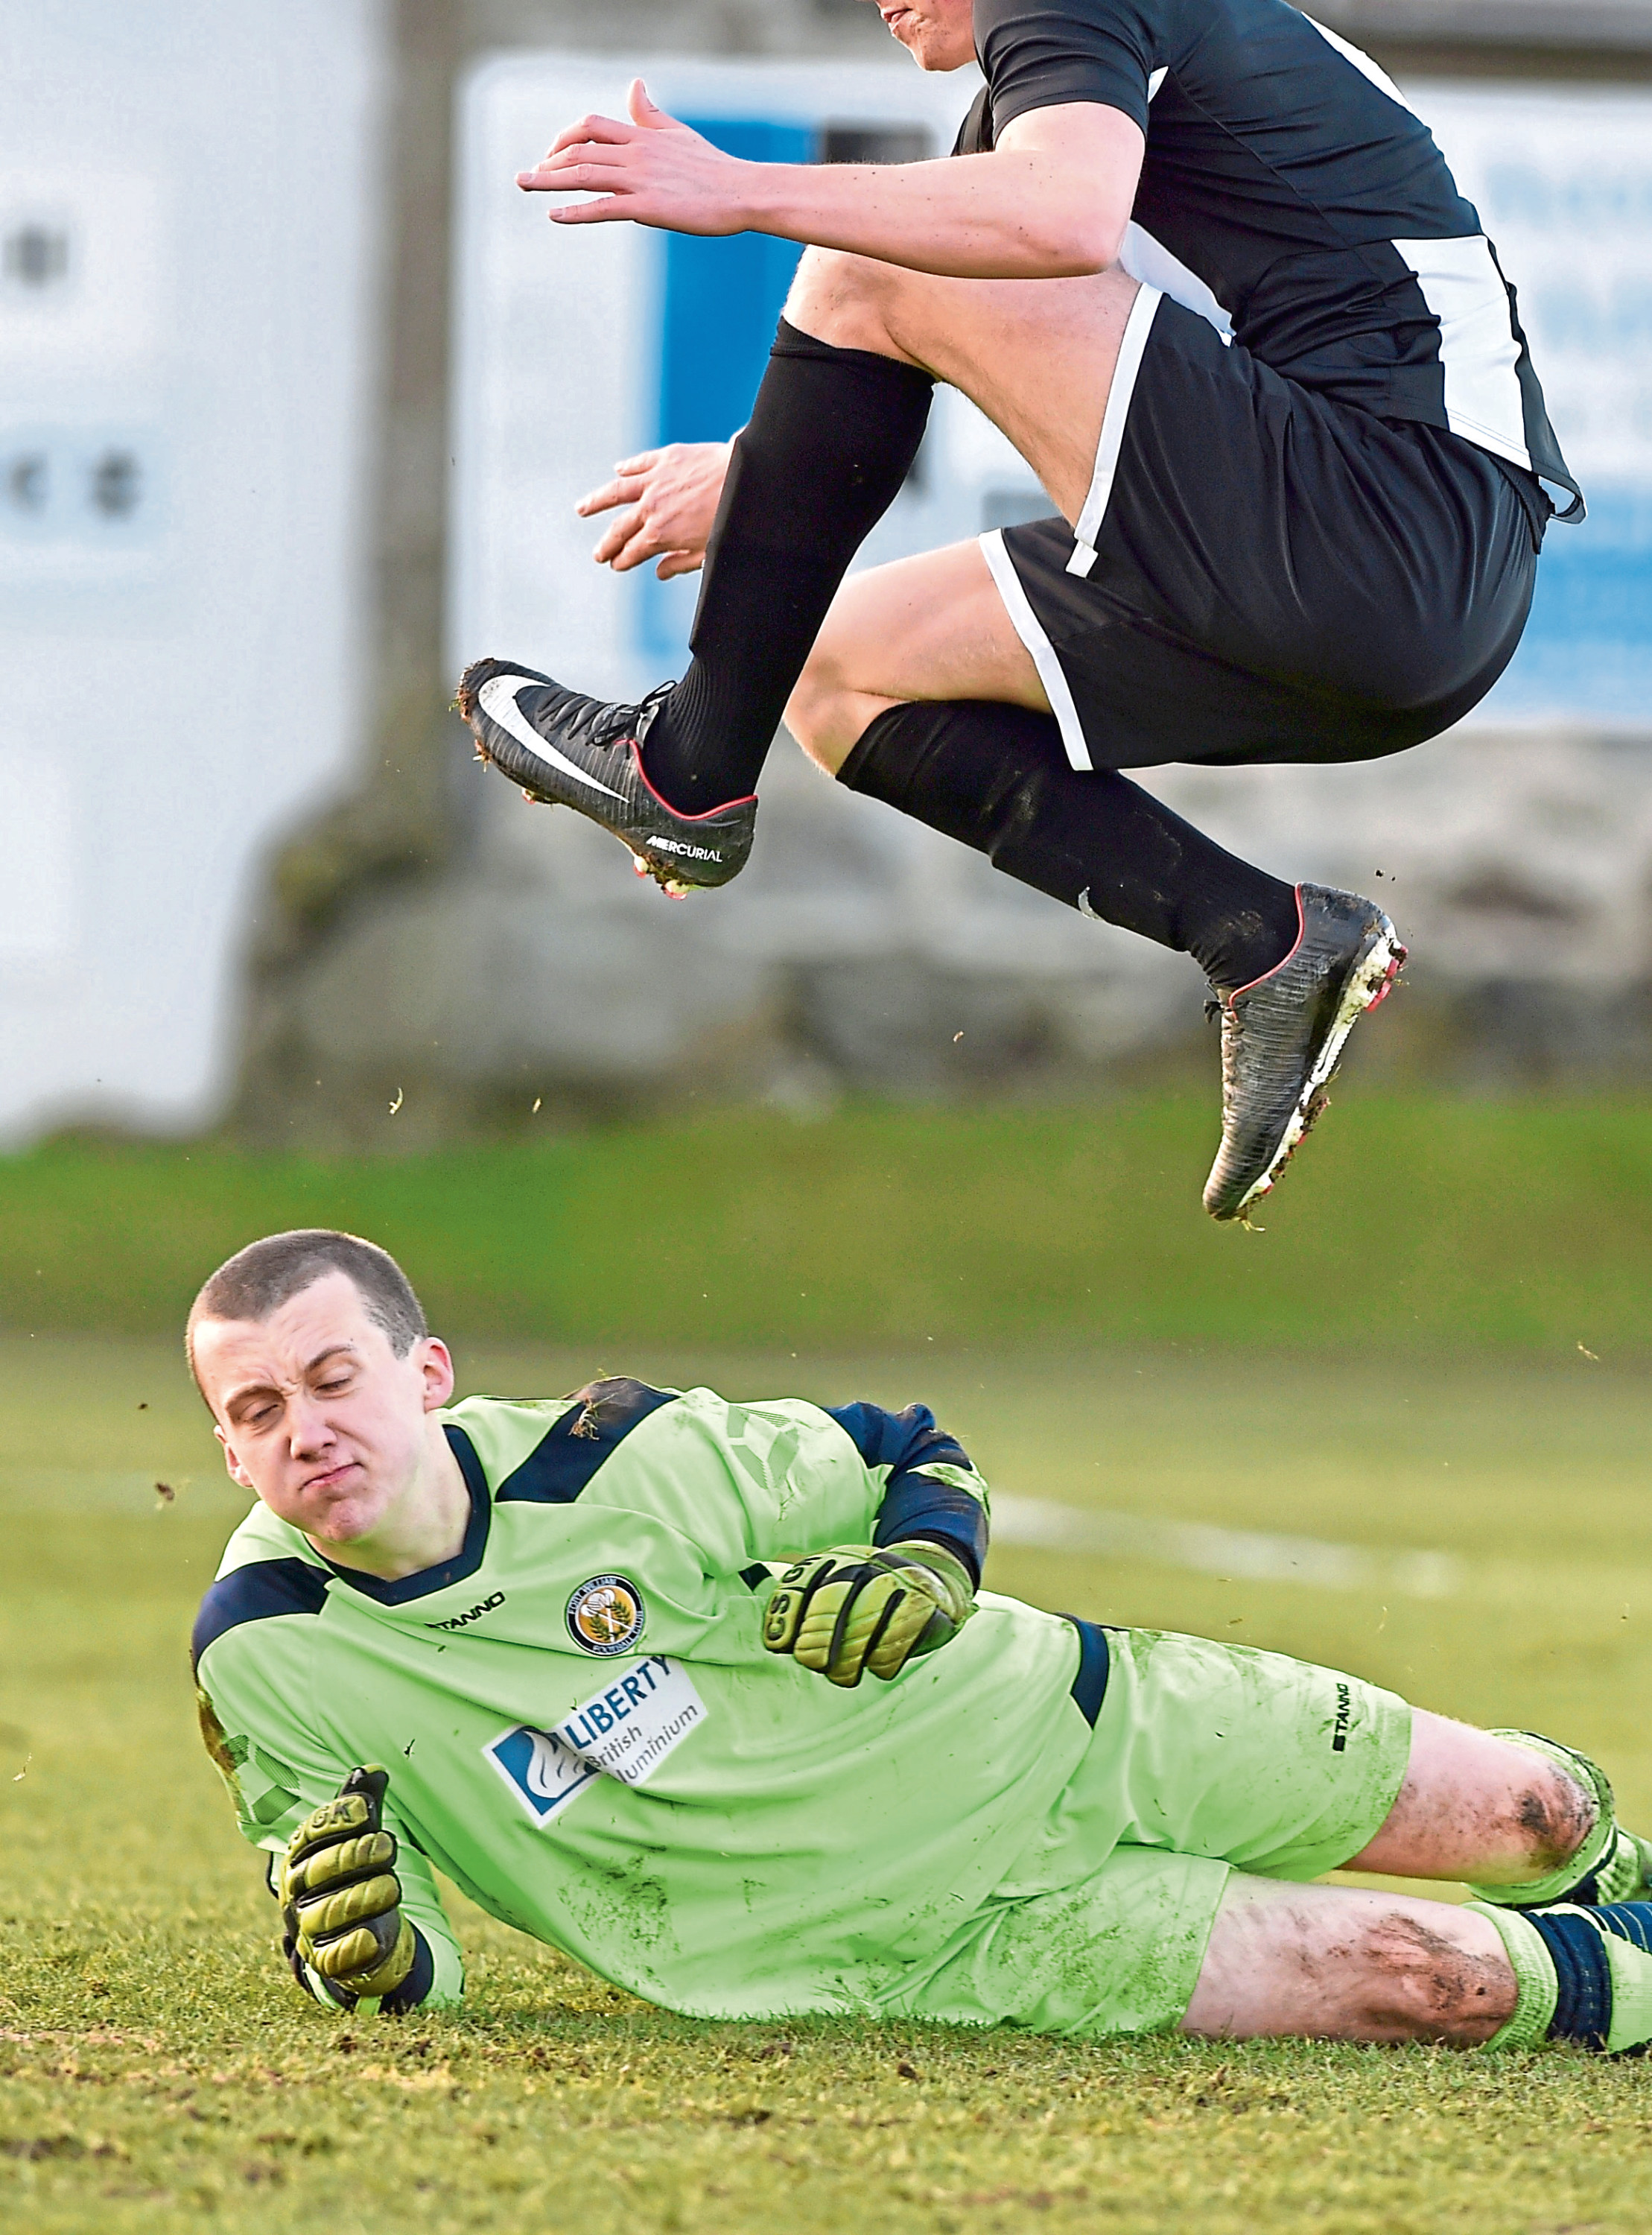 Keeper Martin MacKinnon in action for Fort William during a previous loan spell.
Picture by Colin Rennie